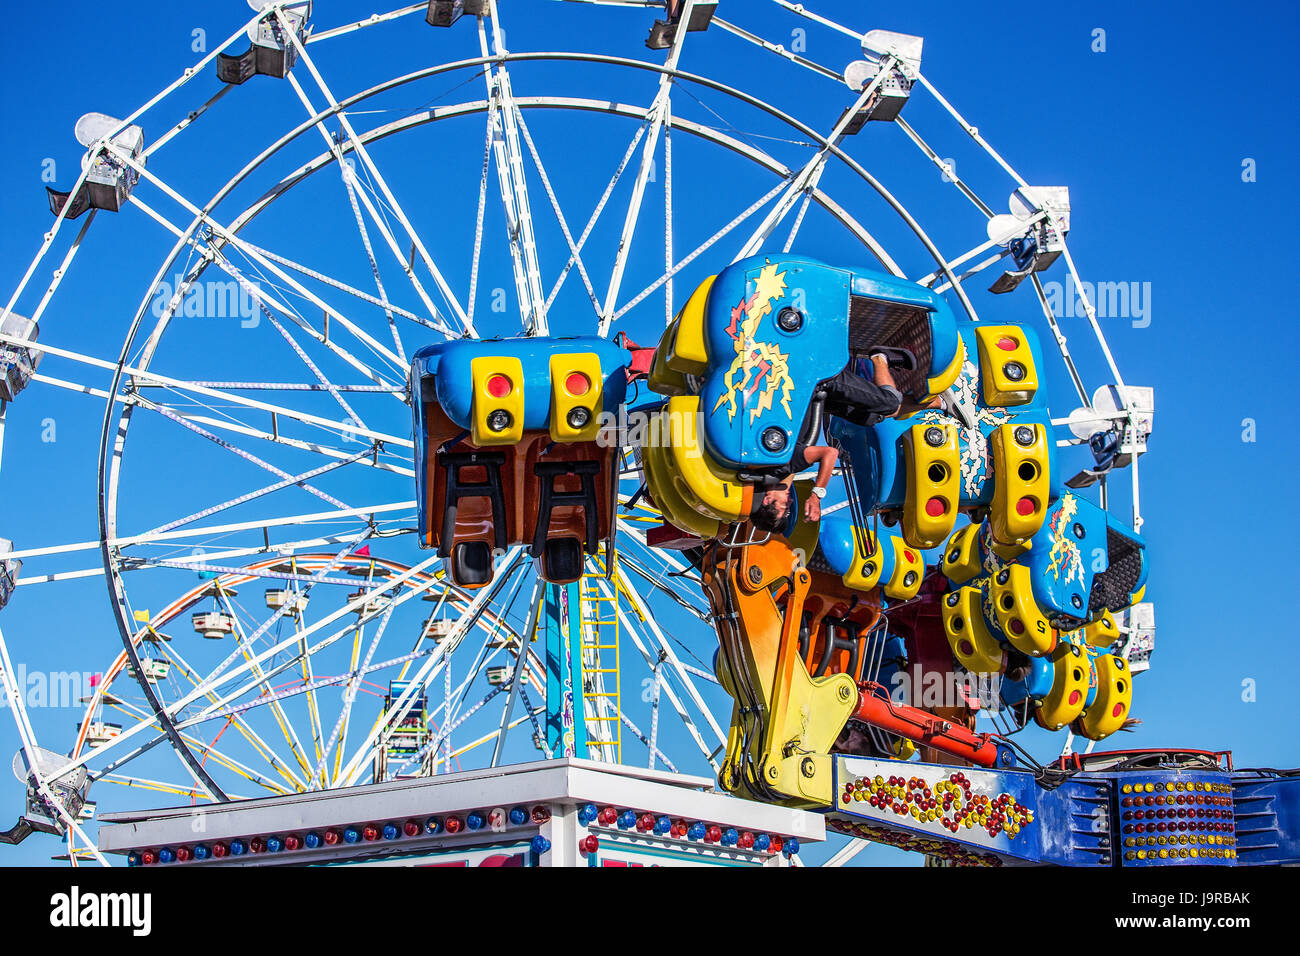 Popular ride at the county fair. Stock Photo